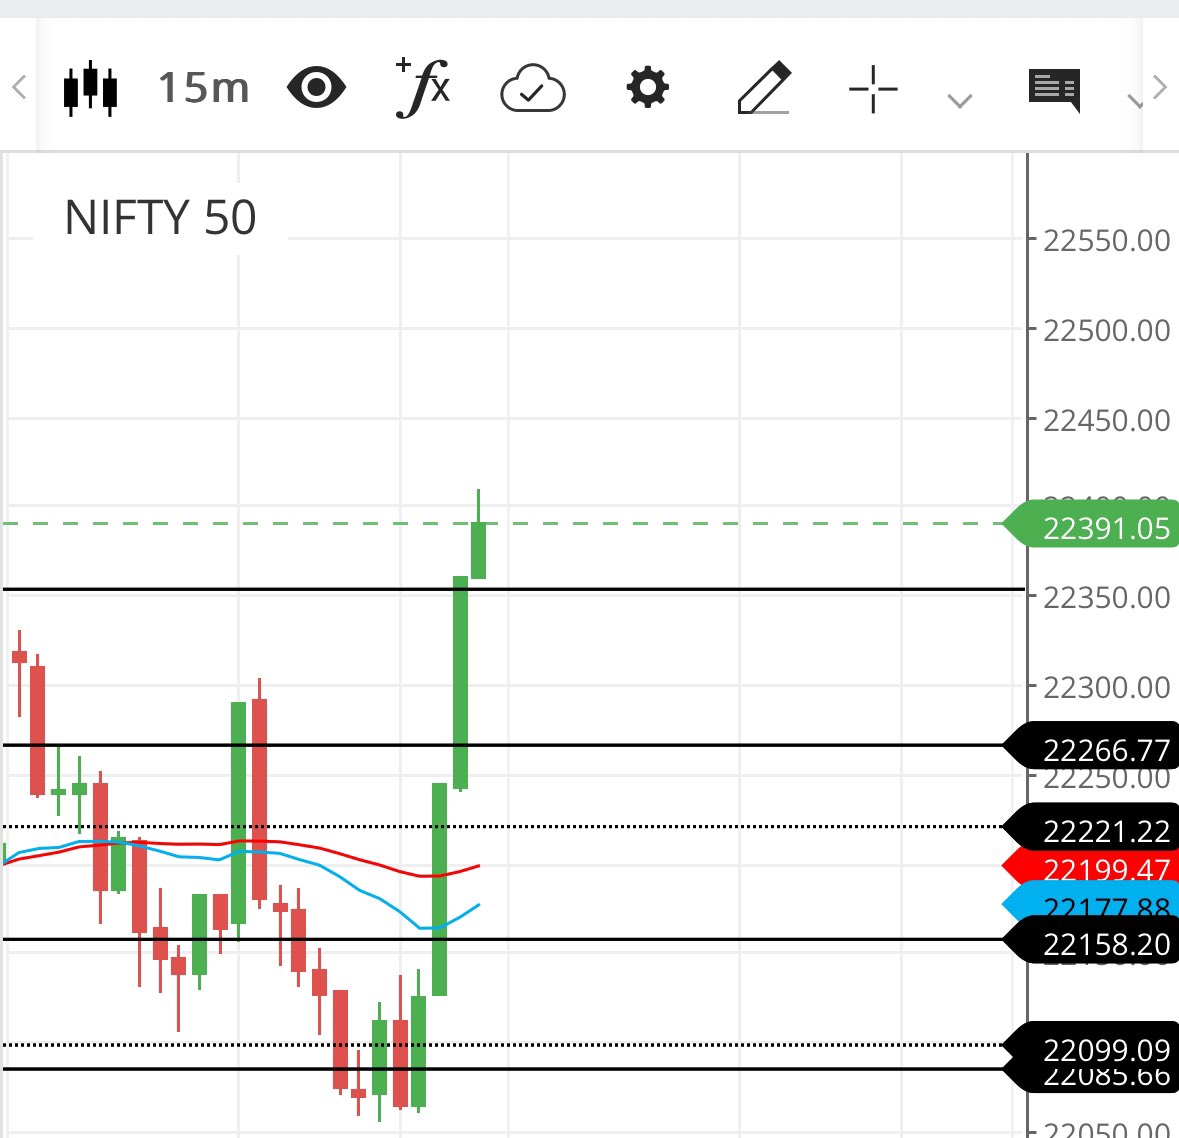 Any fall till 22353 might be bought I doubt we will go back to 266 Always keep some dry powder for when opportunity knocks.